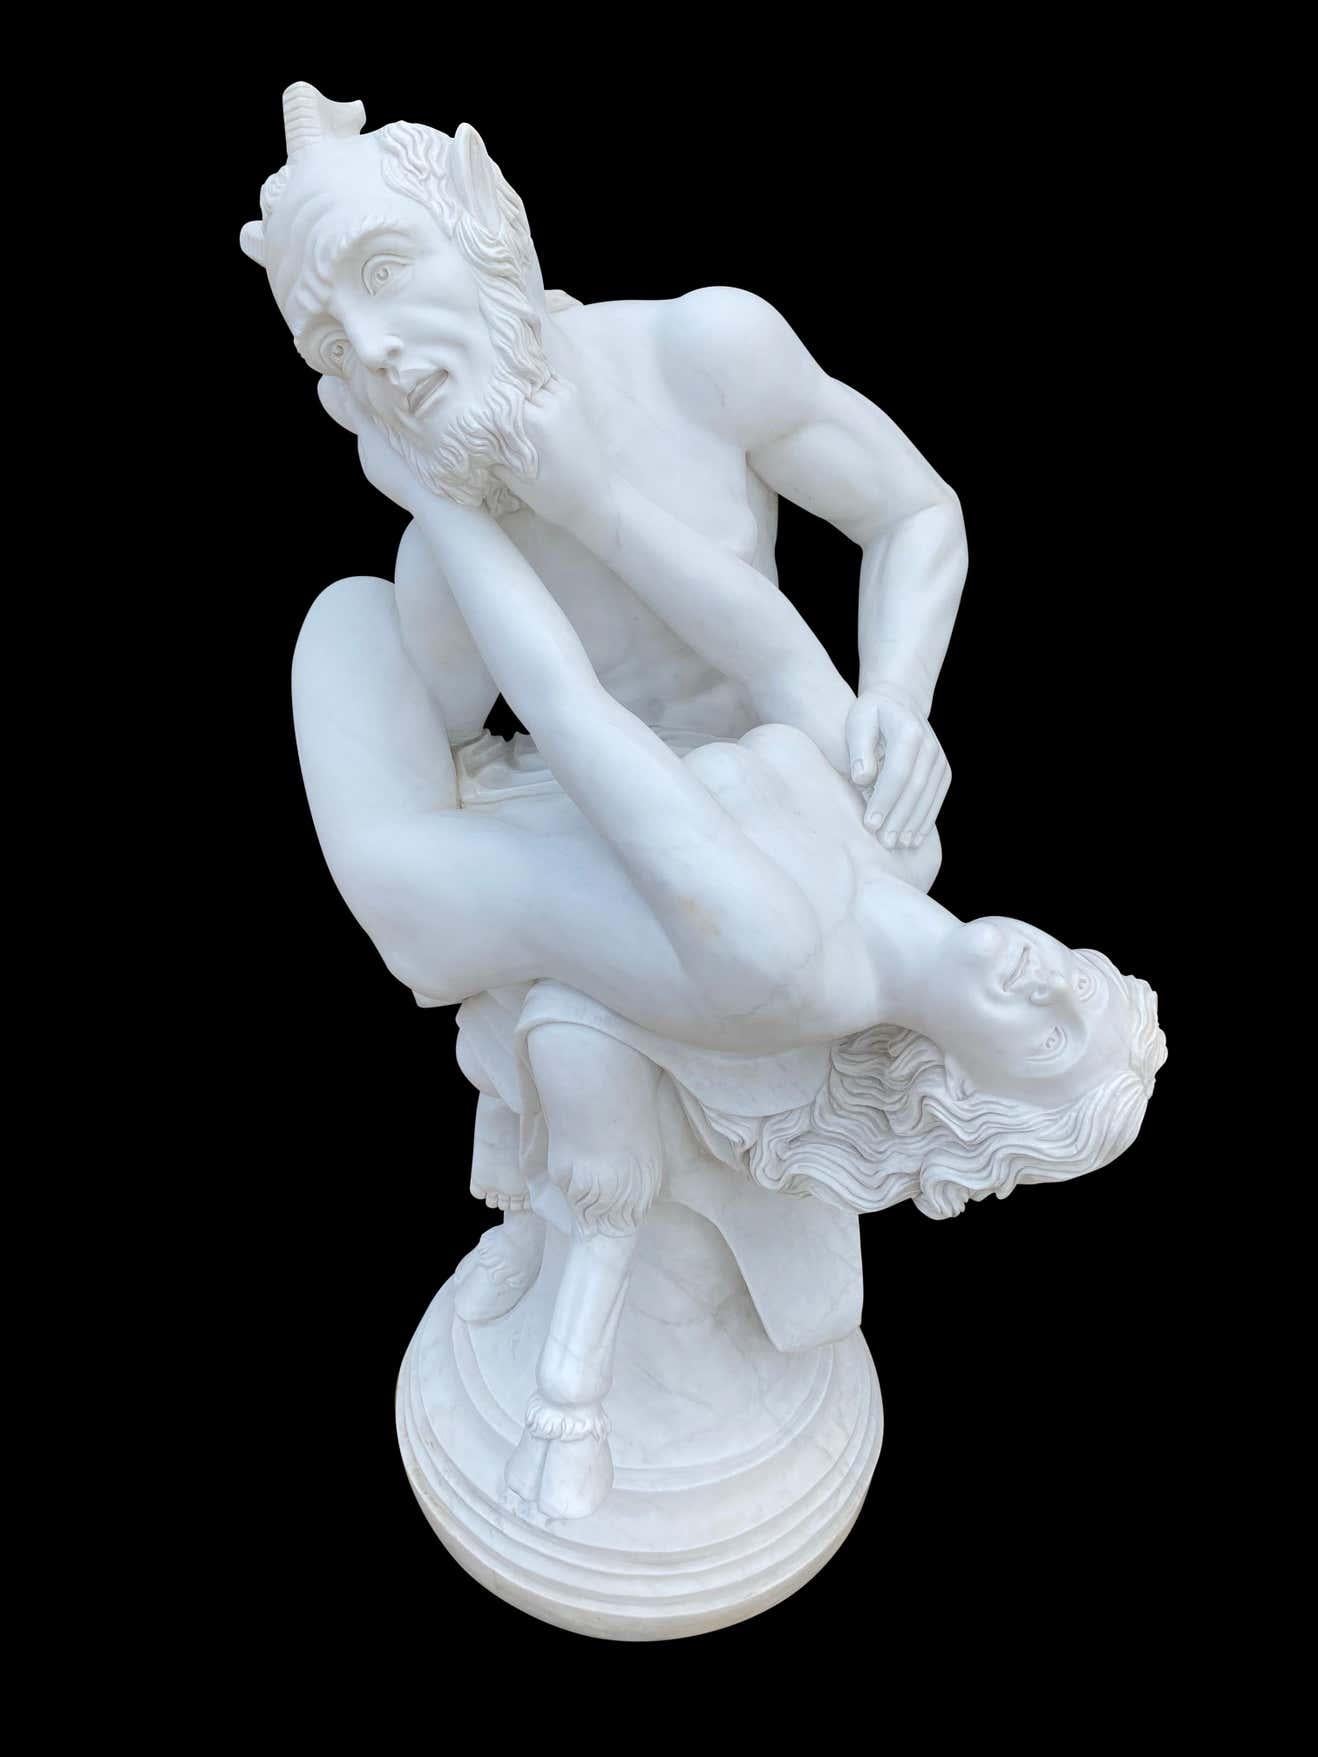 20th Century Life-Sized Sculpture of Pan the Ancient Greek God of Sexuality For Sale 6